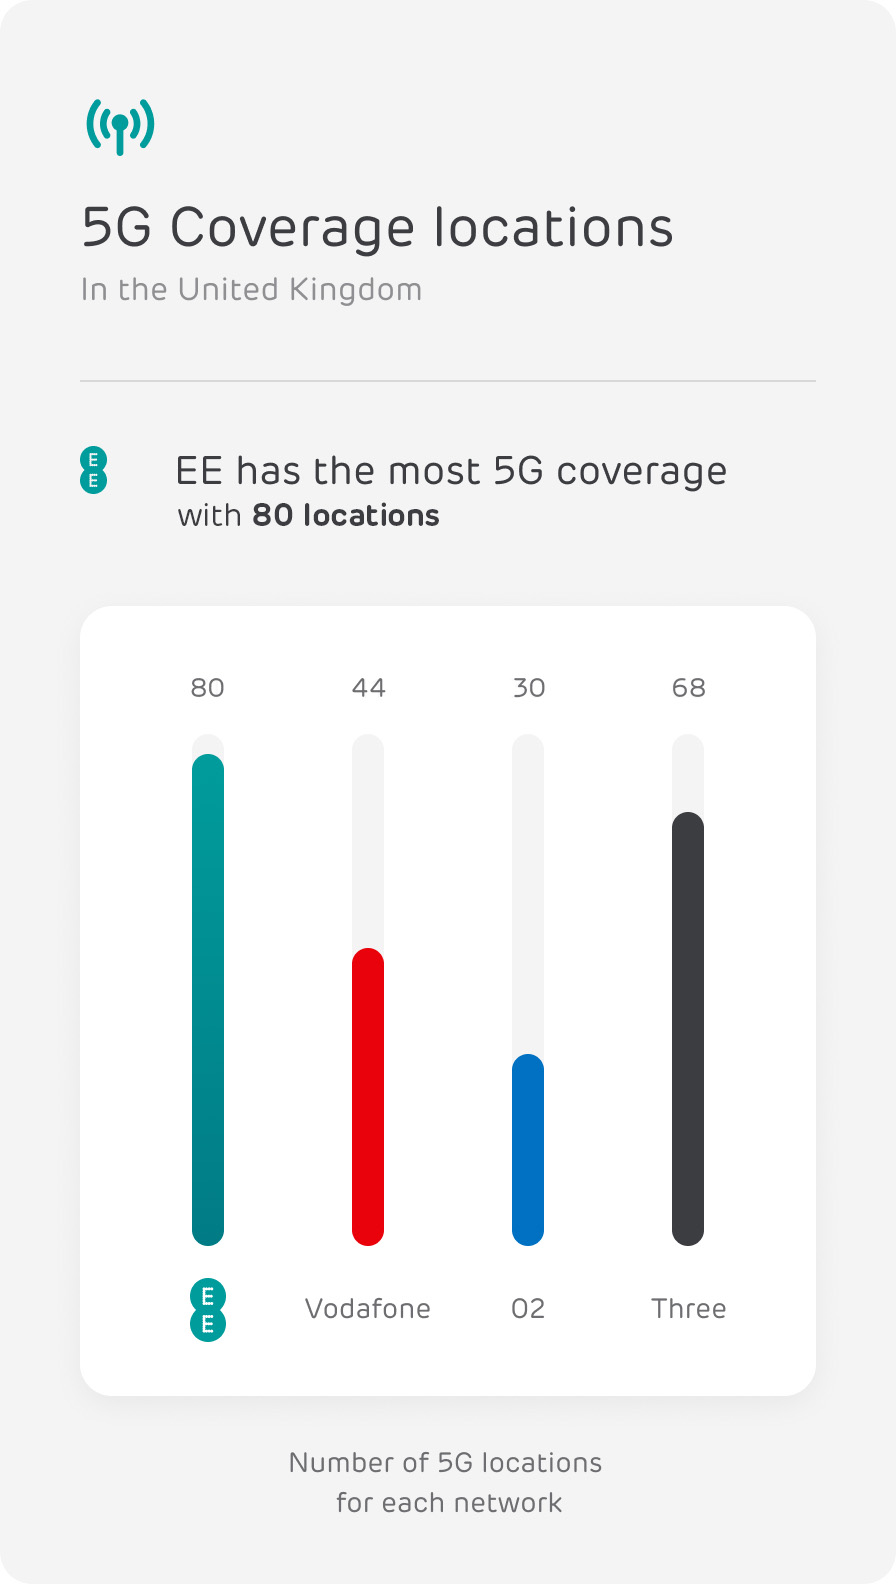 5G Coverage locations of major networks